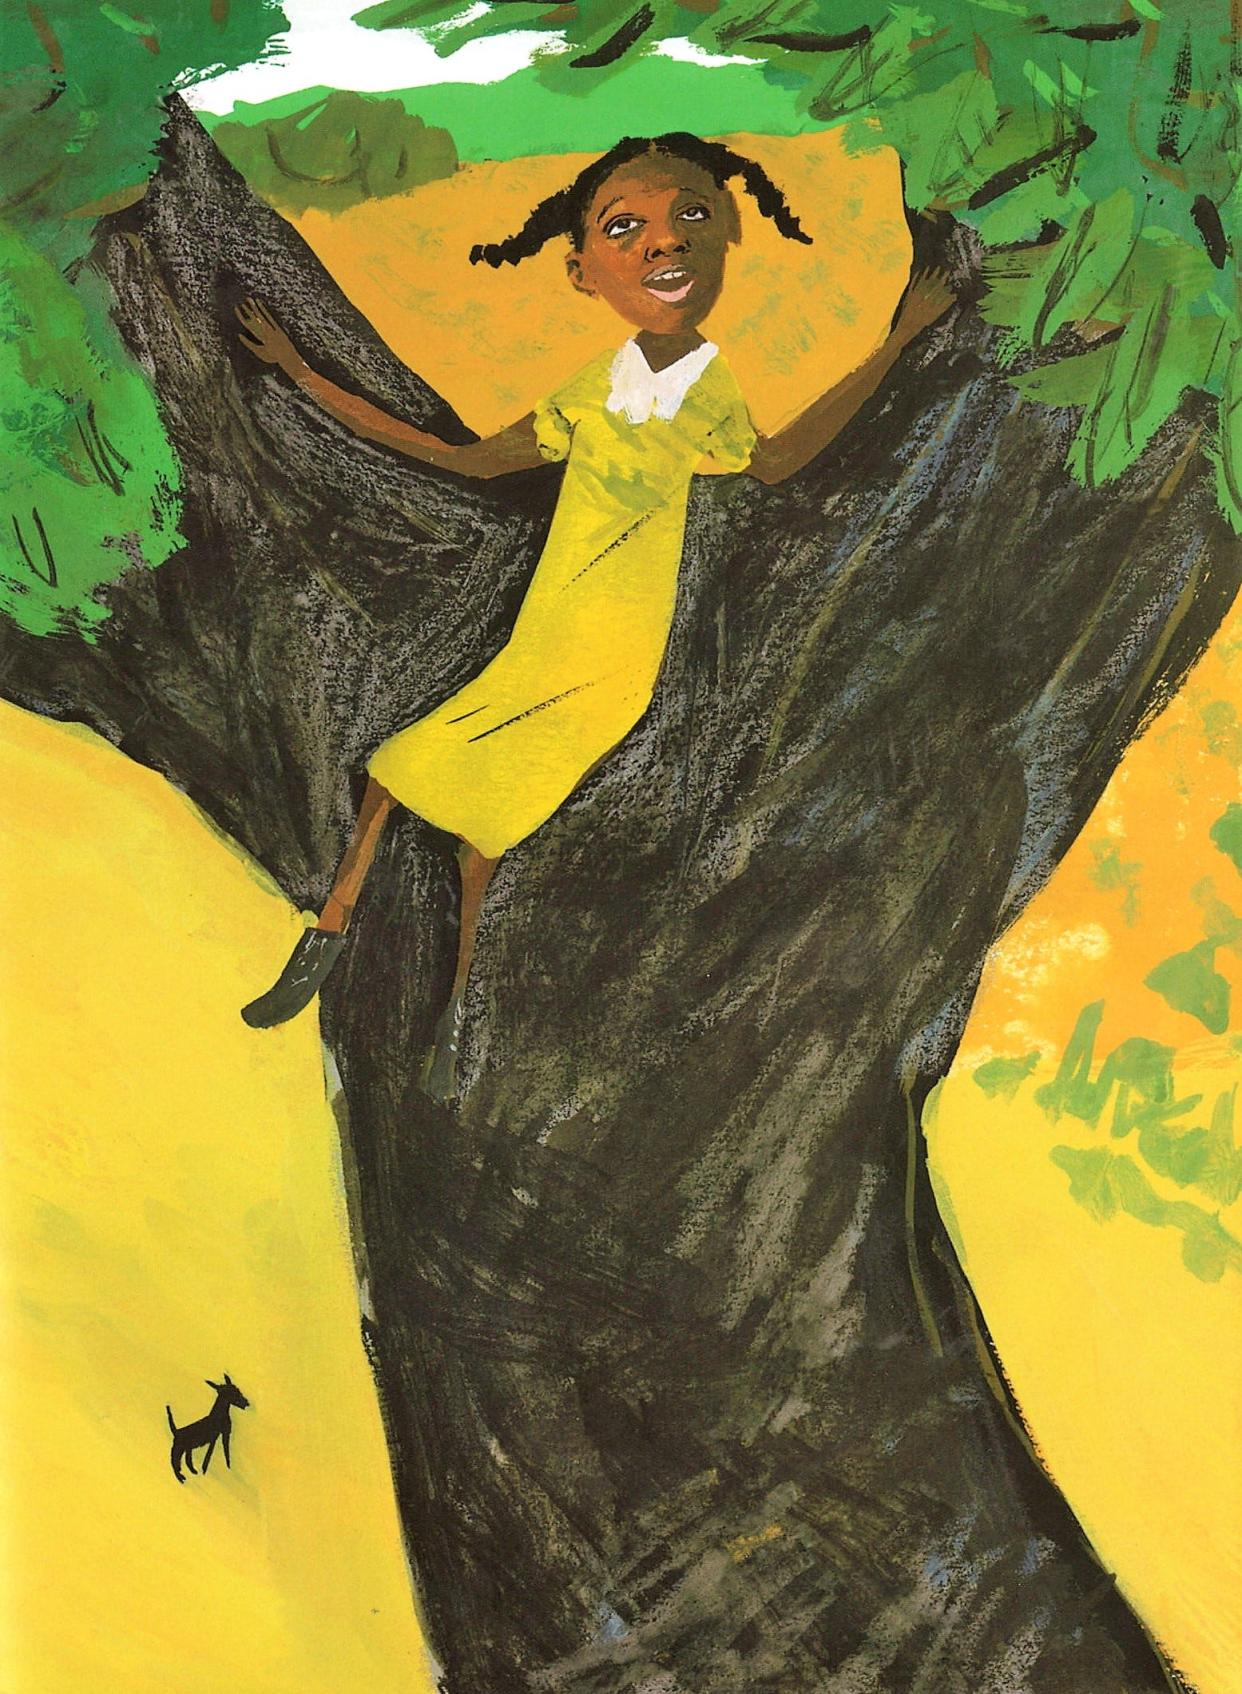 Not just boys can climb trees, as this girl proves in "Keep Climbing, Girls," by Beah E. Richards and illustrated by Greg Christie.